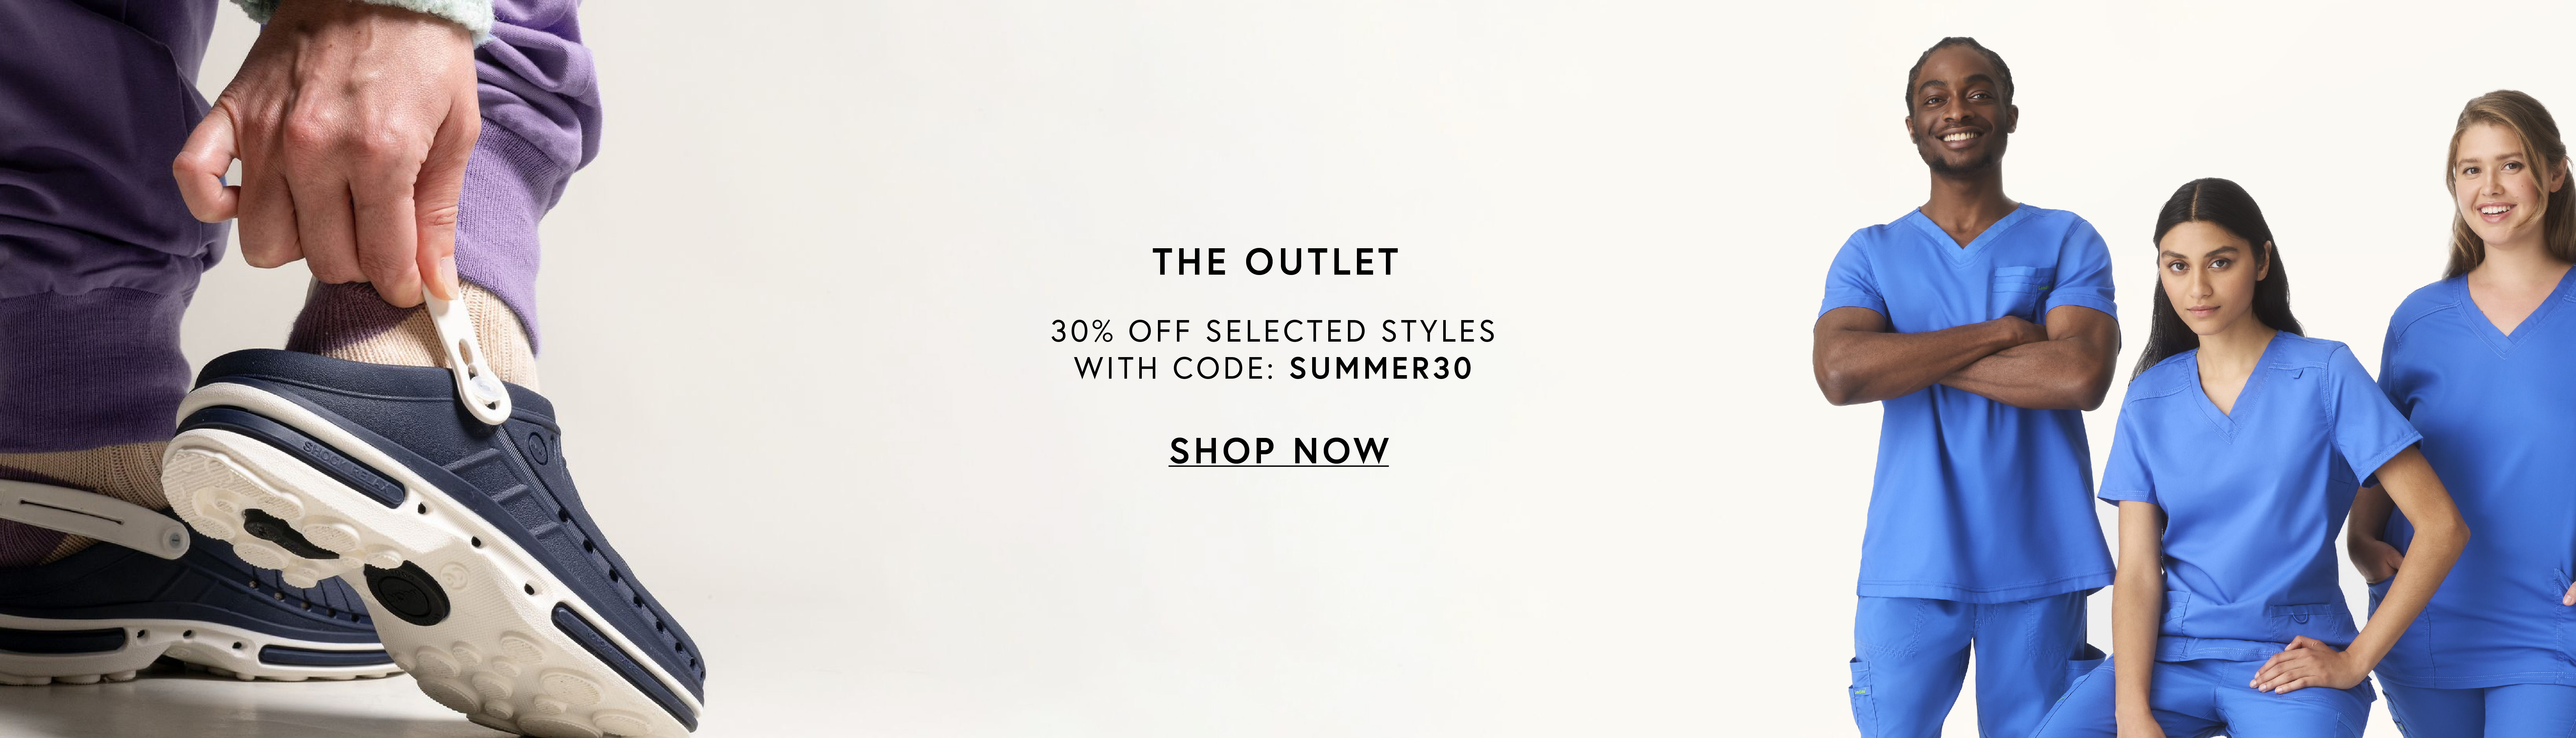 The Outlet - 30% OFF